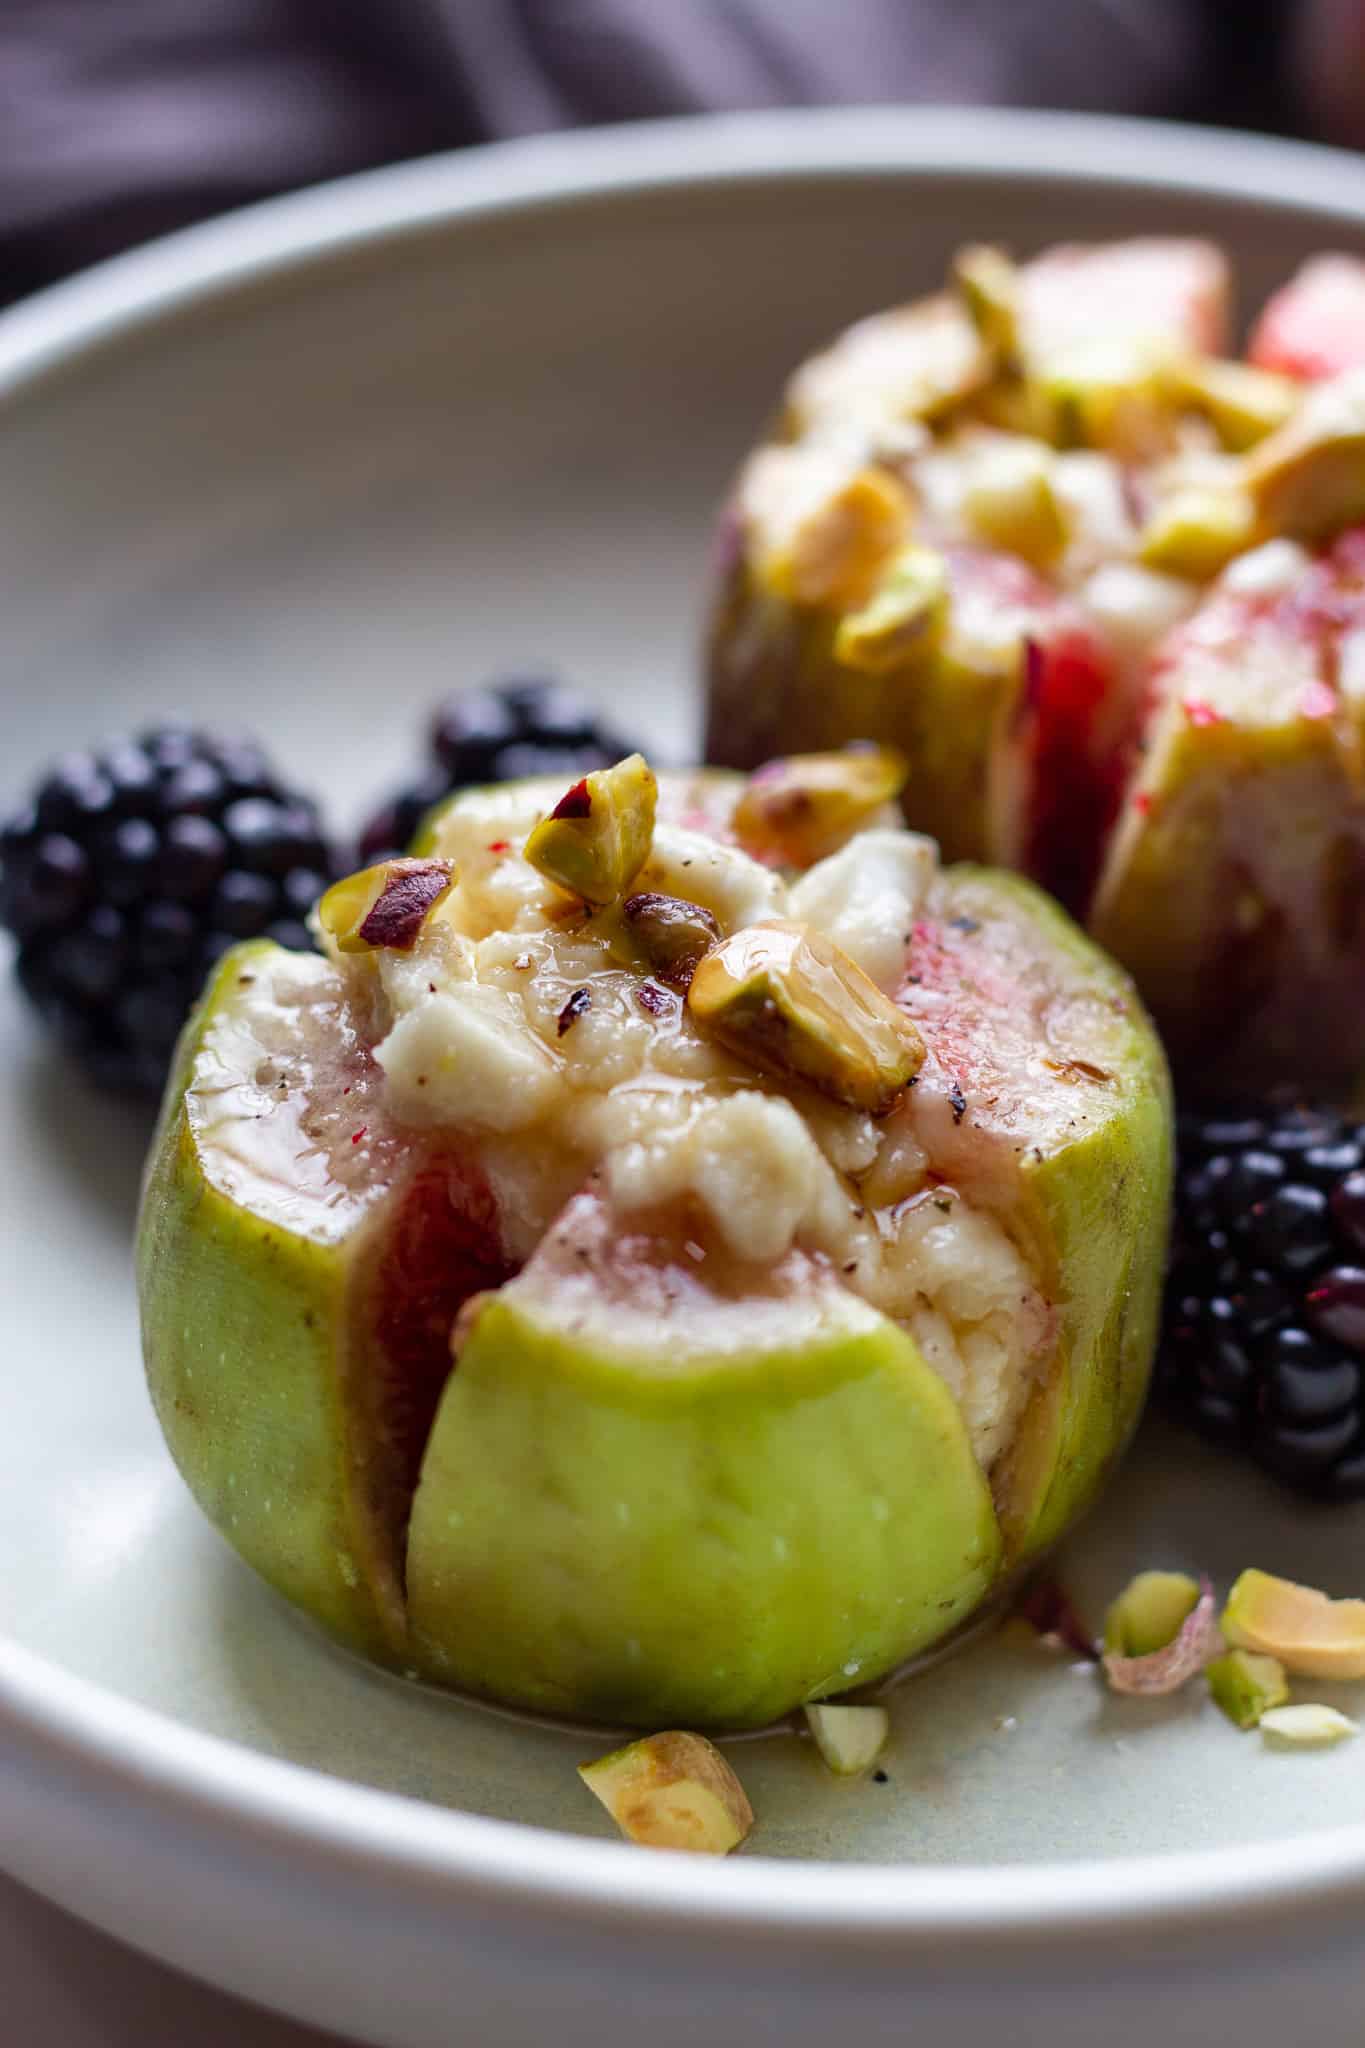 baked figs stuffed with goat cheese, nuts and drizzled with honey on a small plate.